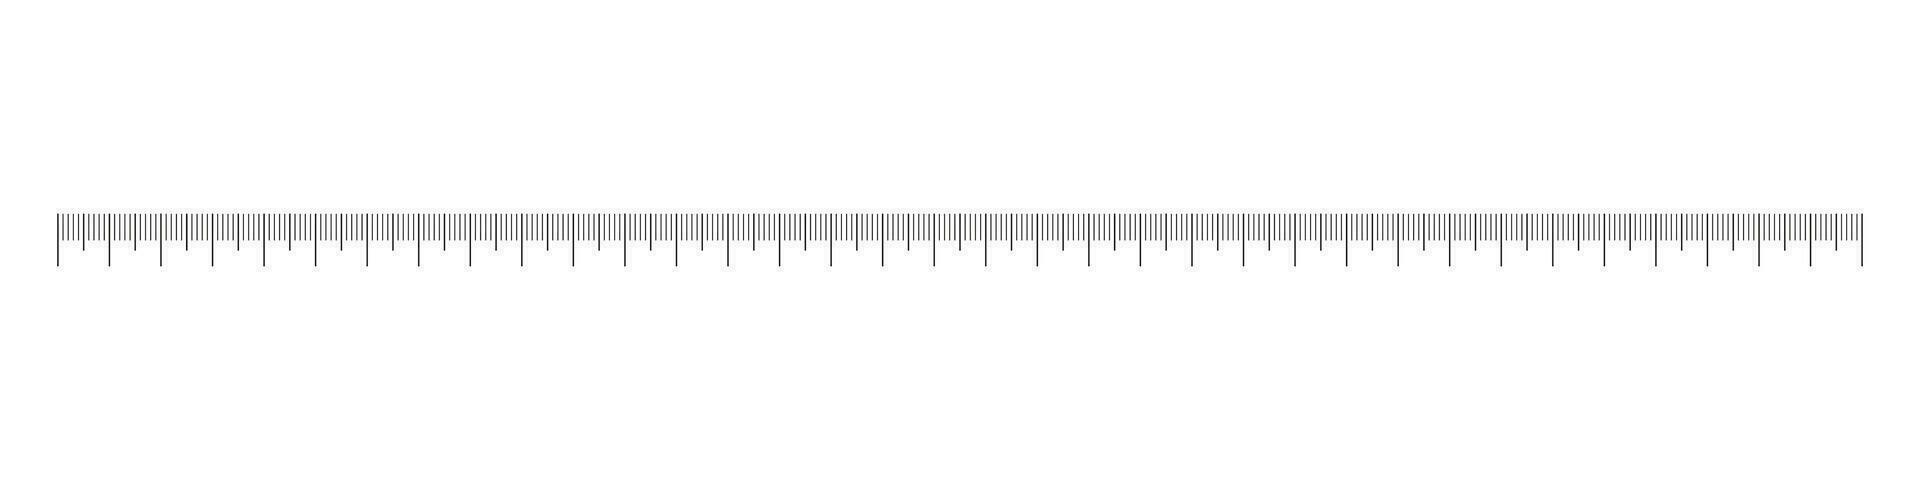 Measuring chart with 35 centimeters. Ruler scale. Length measurement math, distance, height, sewing tool. Graphic vector outline illustration.